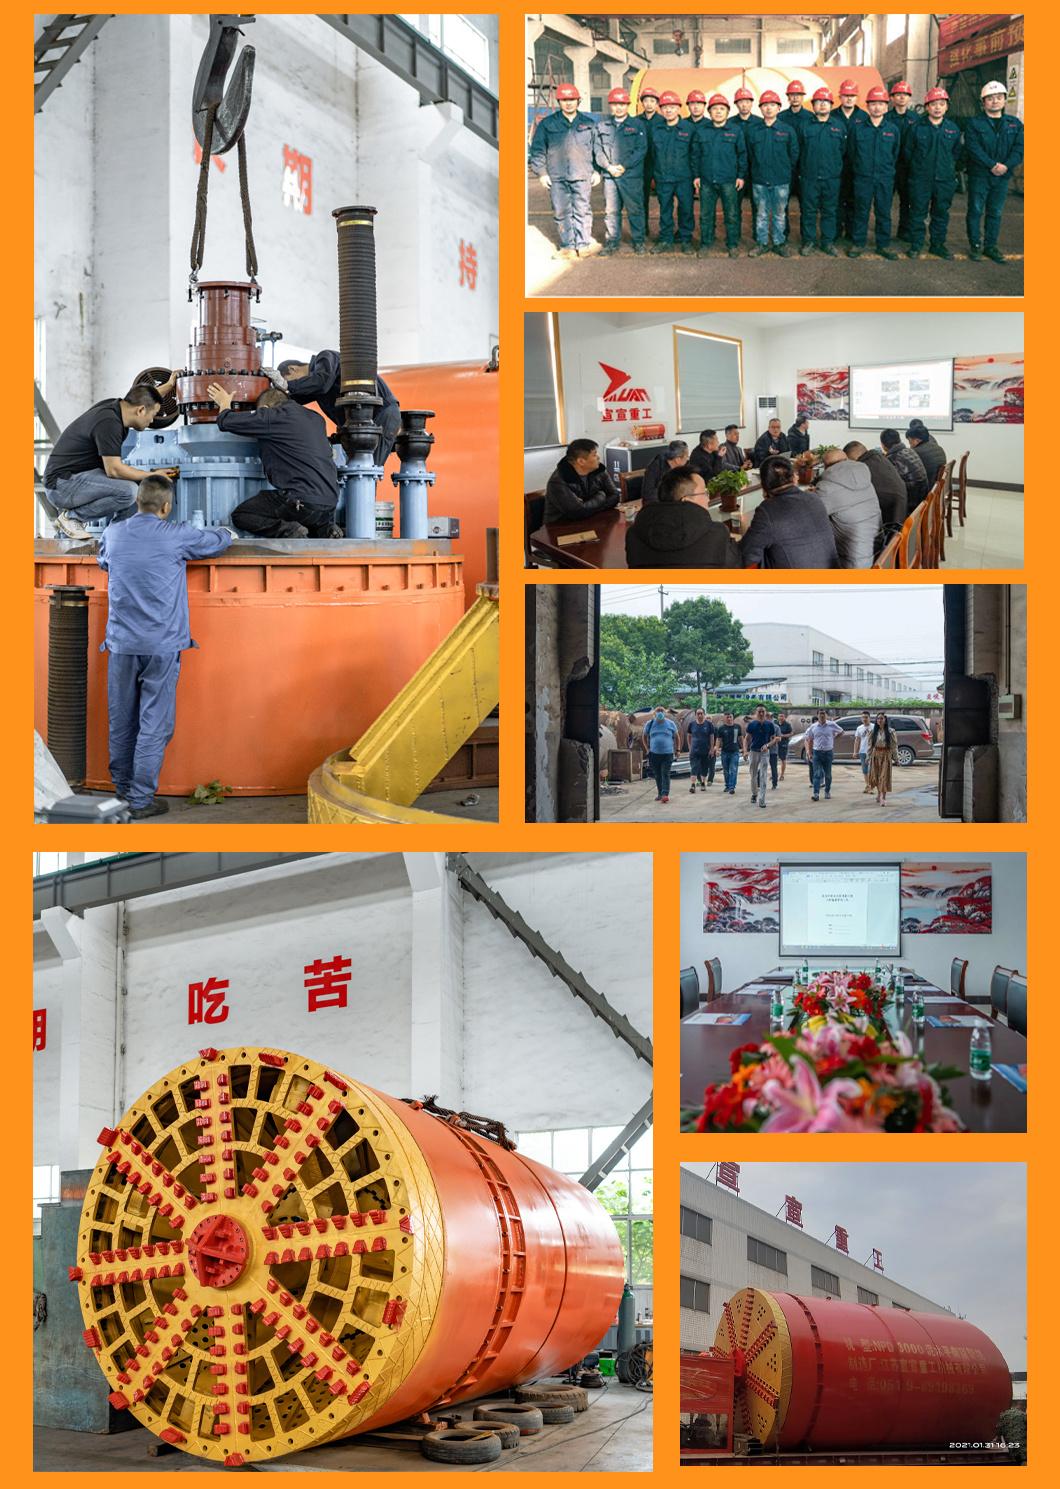 Quality Professional Trenchless Project Ysd3000 Rock Pipe Jacking Machine for Rcc